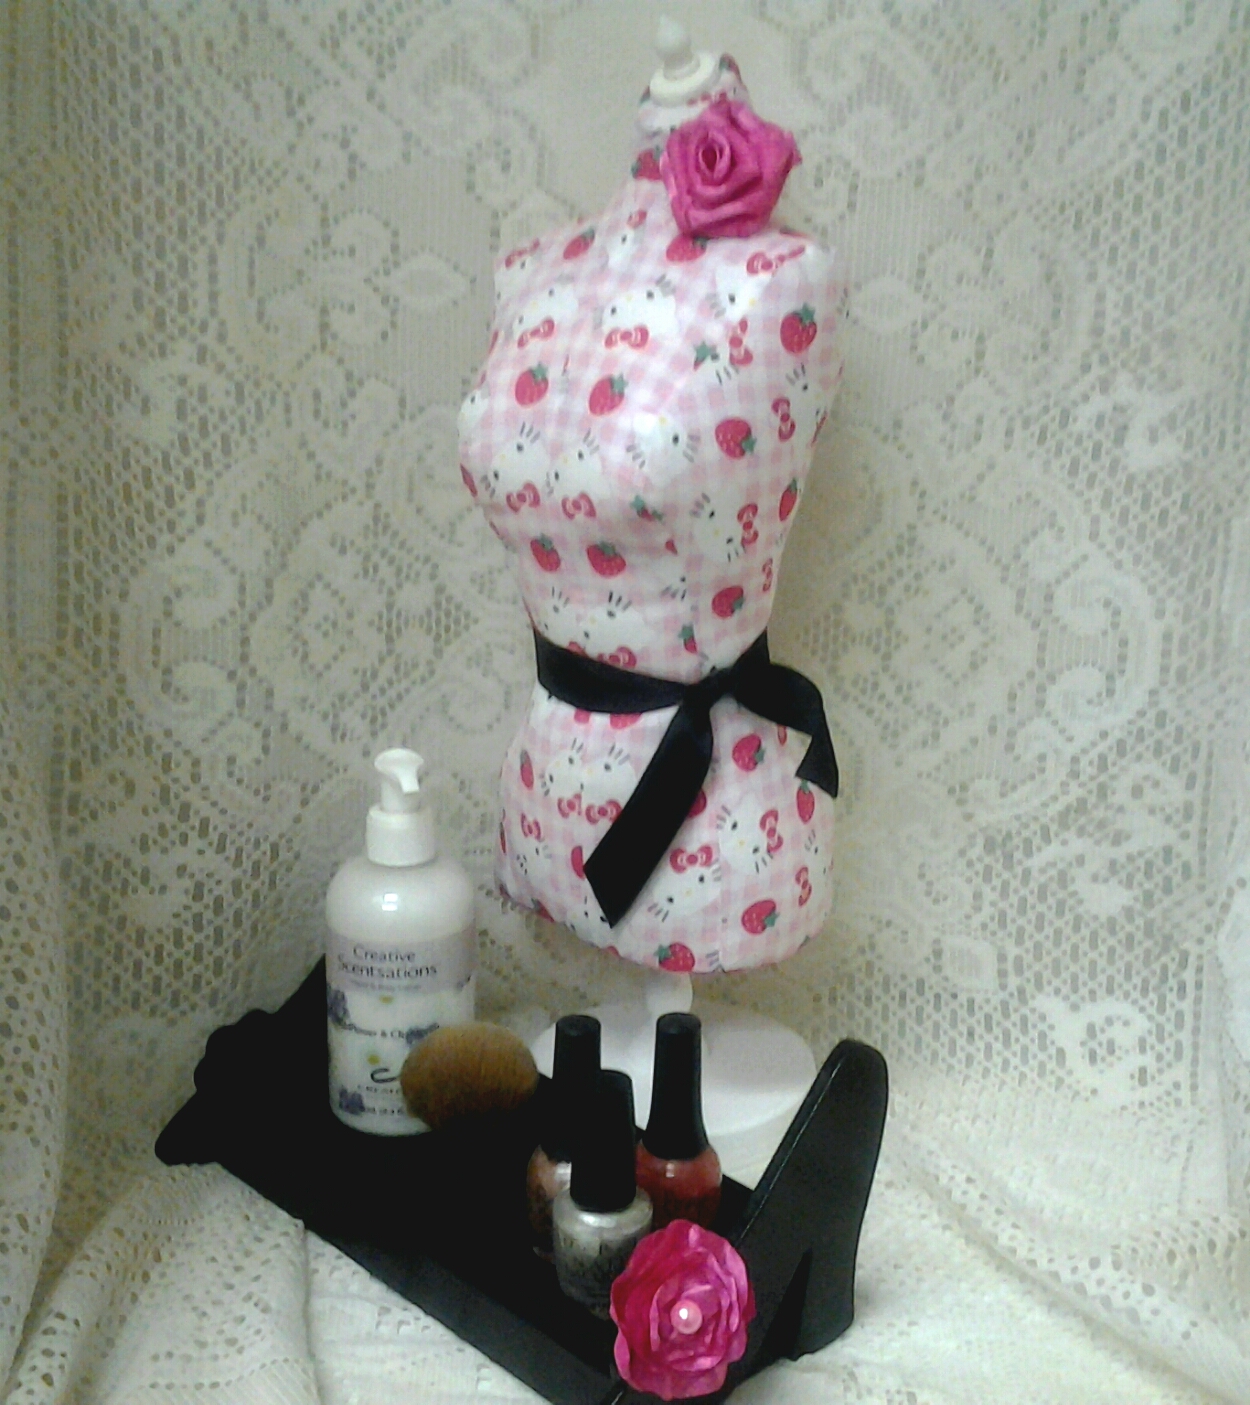 Boutique Dress Form Designs Jewelry Display, 19" Torso Great For Store Front Display Or Home Decor. Hello Kitty Print.